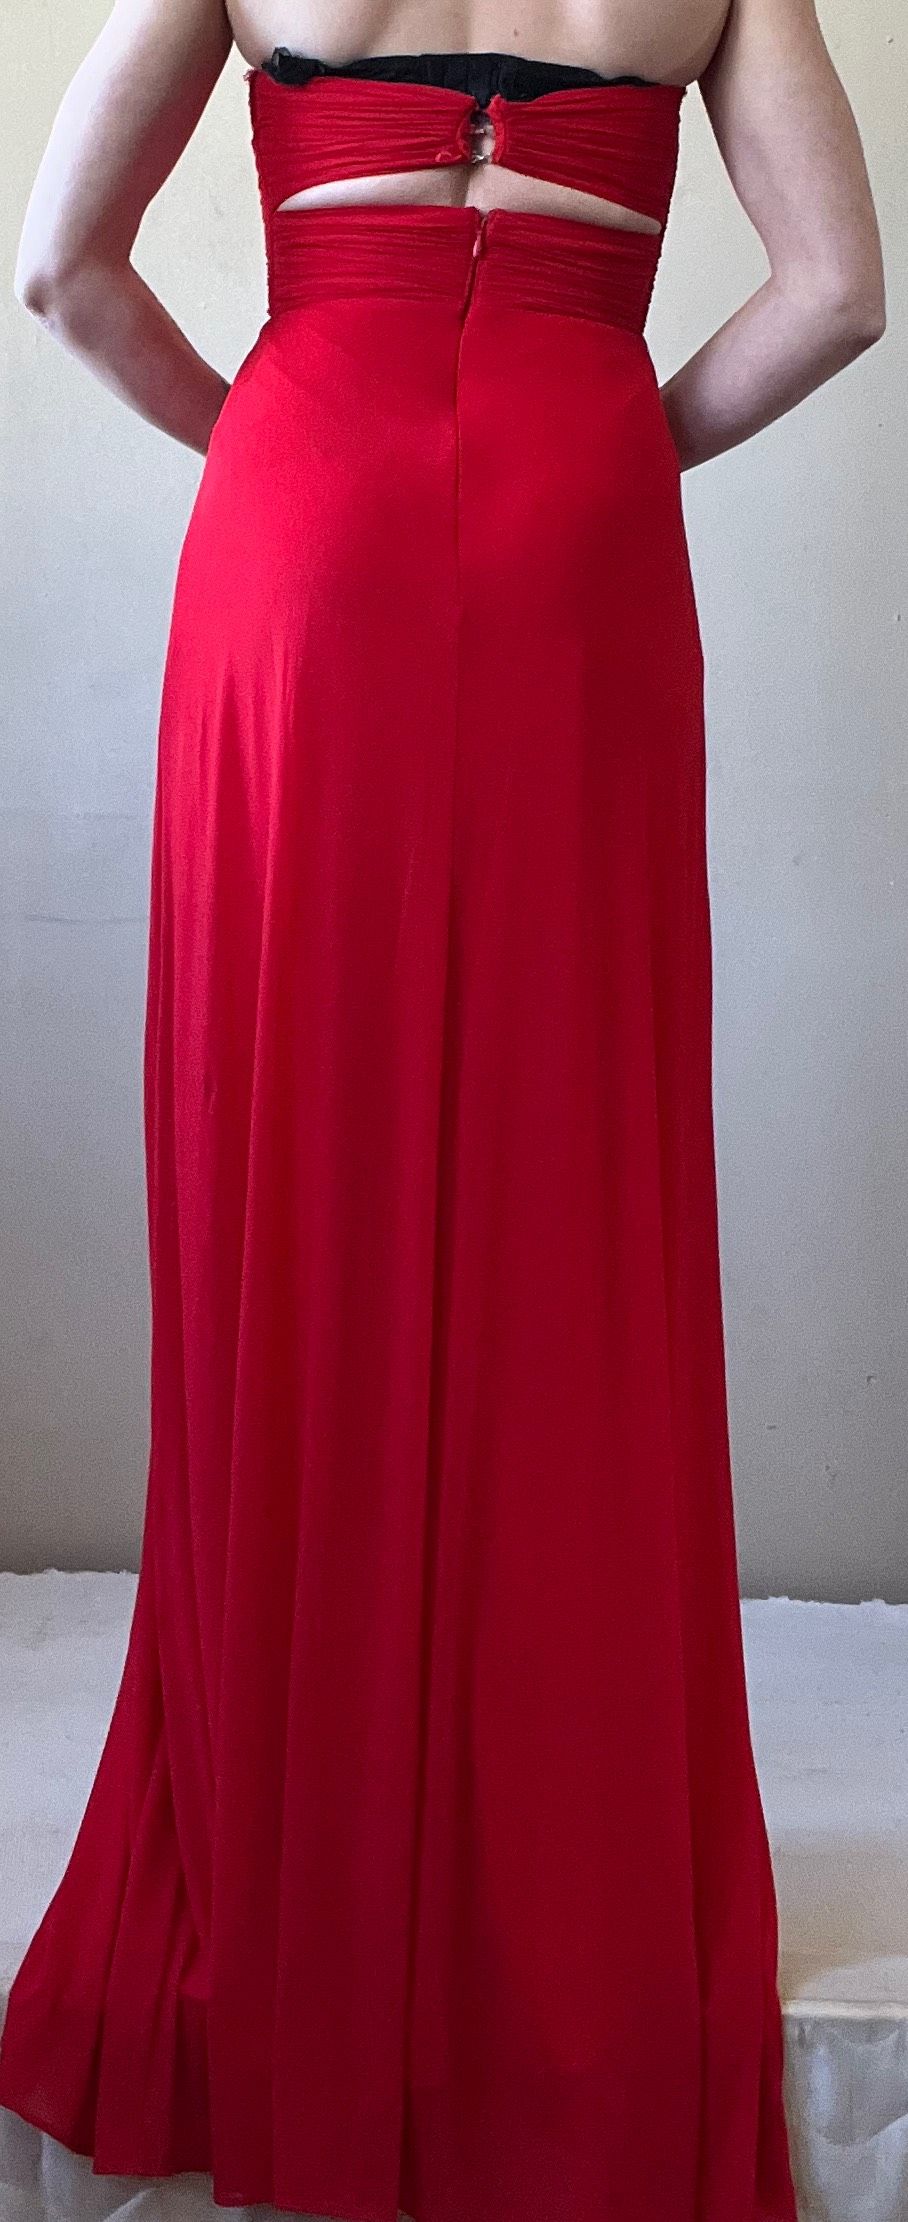 Stacy skylar Size 2 Prom Strapless Sequined Red A-line Dress on Queenly